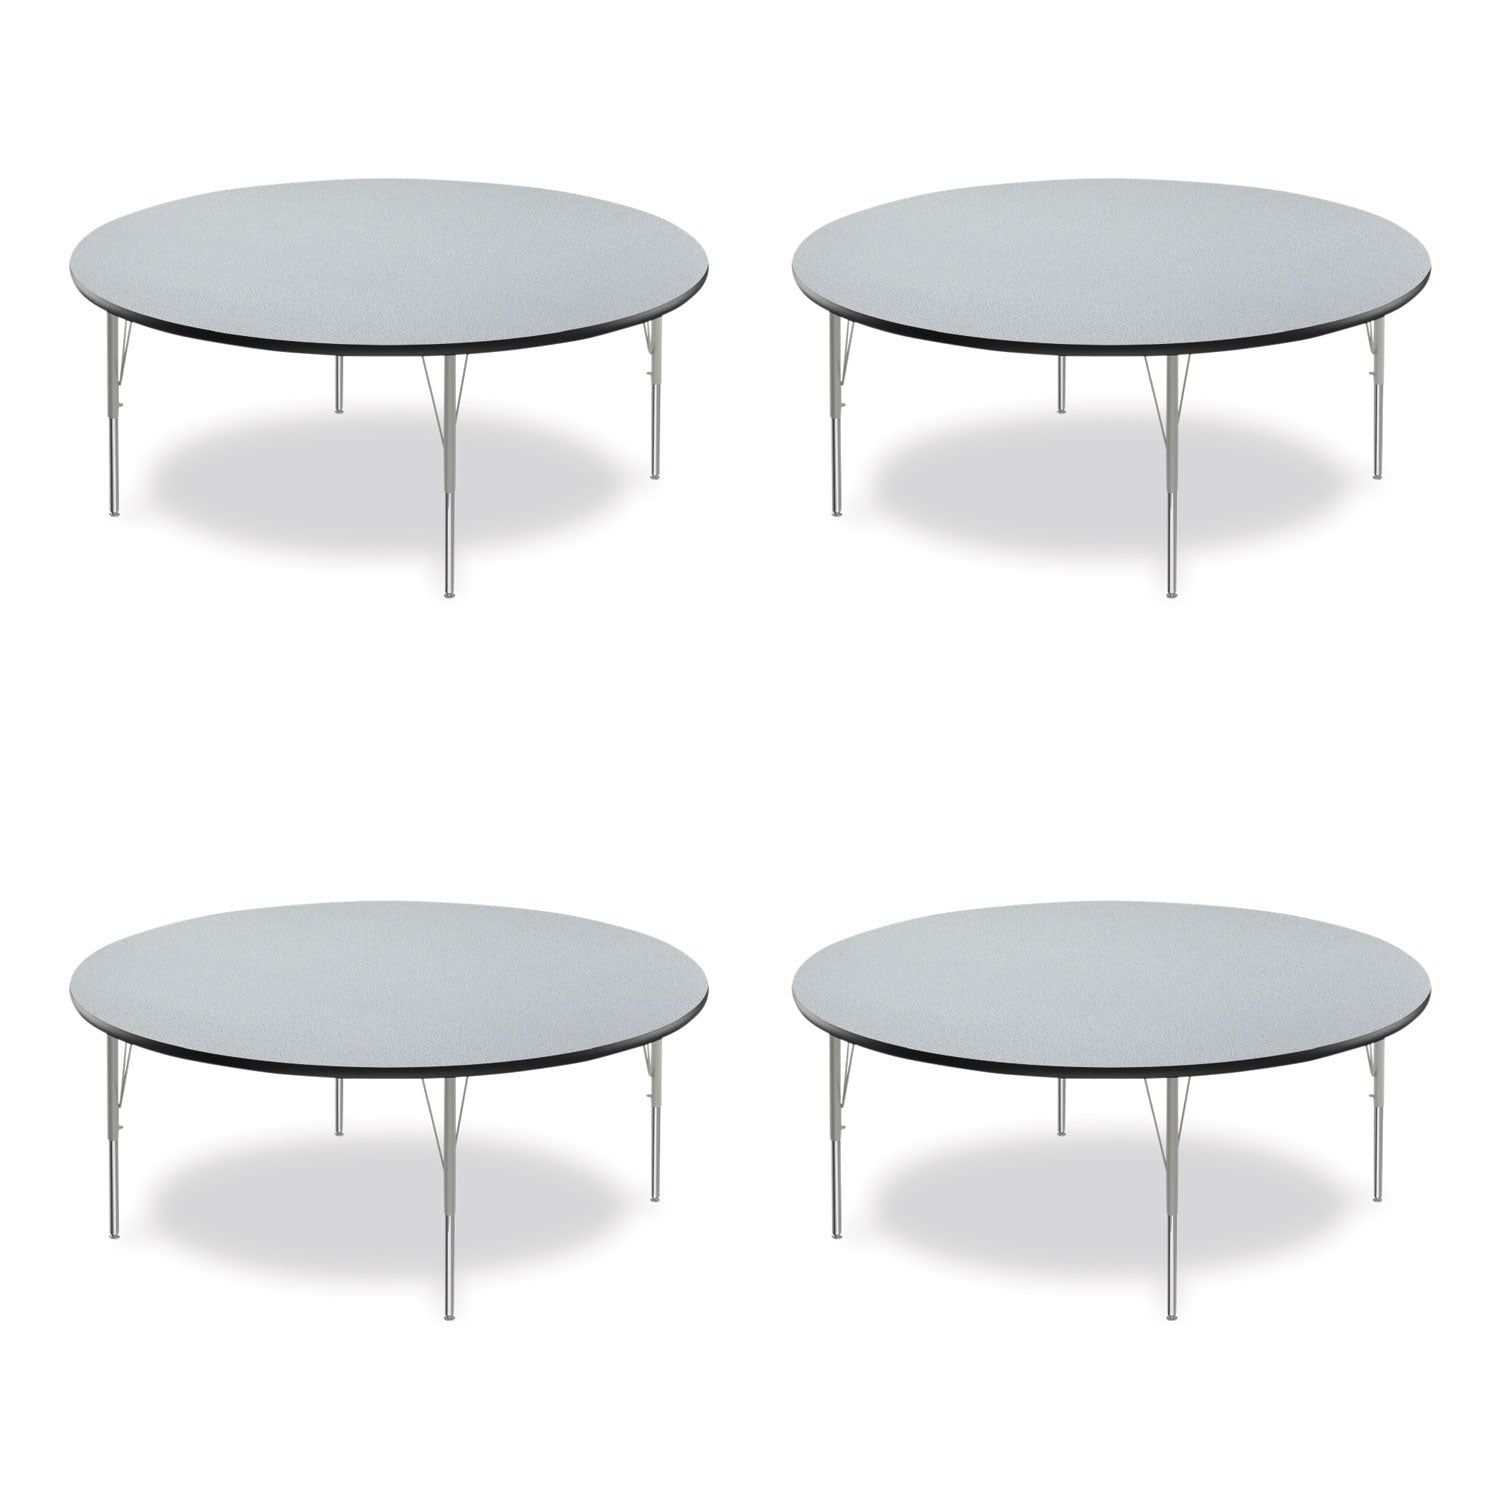 height-adjustable-activity-tables-round-60-x-19-to-29-gray-granite-top-gray-legs-4-pallet-ships-in-4-6-business-days_crl60tfrd15954p - 1